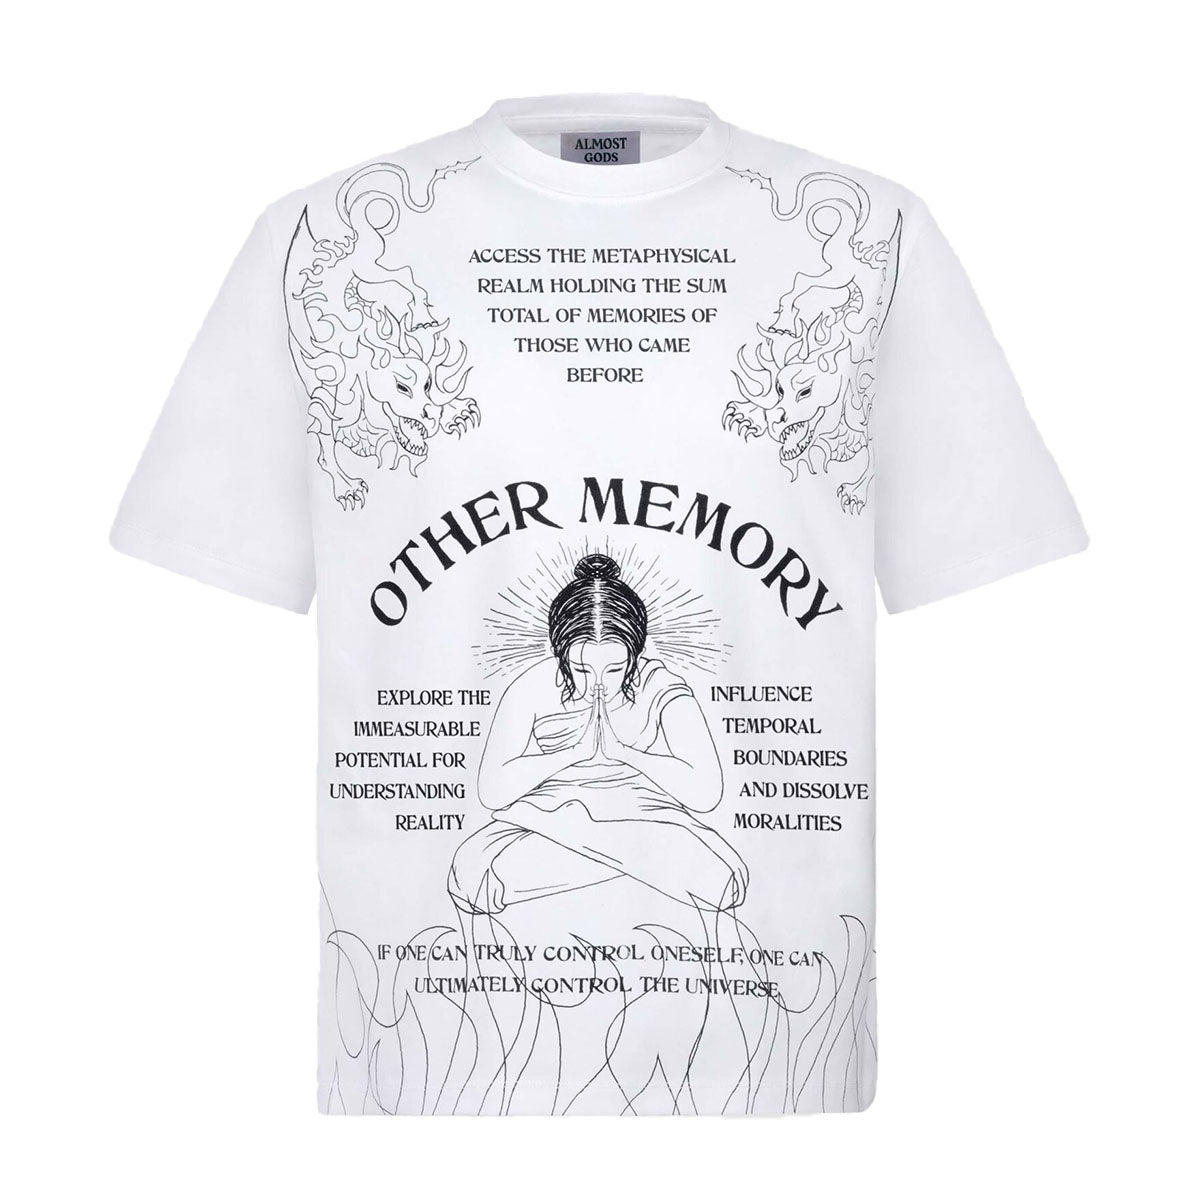 ALMOST GODS OTHER MEMORY MANIFESTO TEE IN WHITE